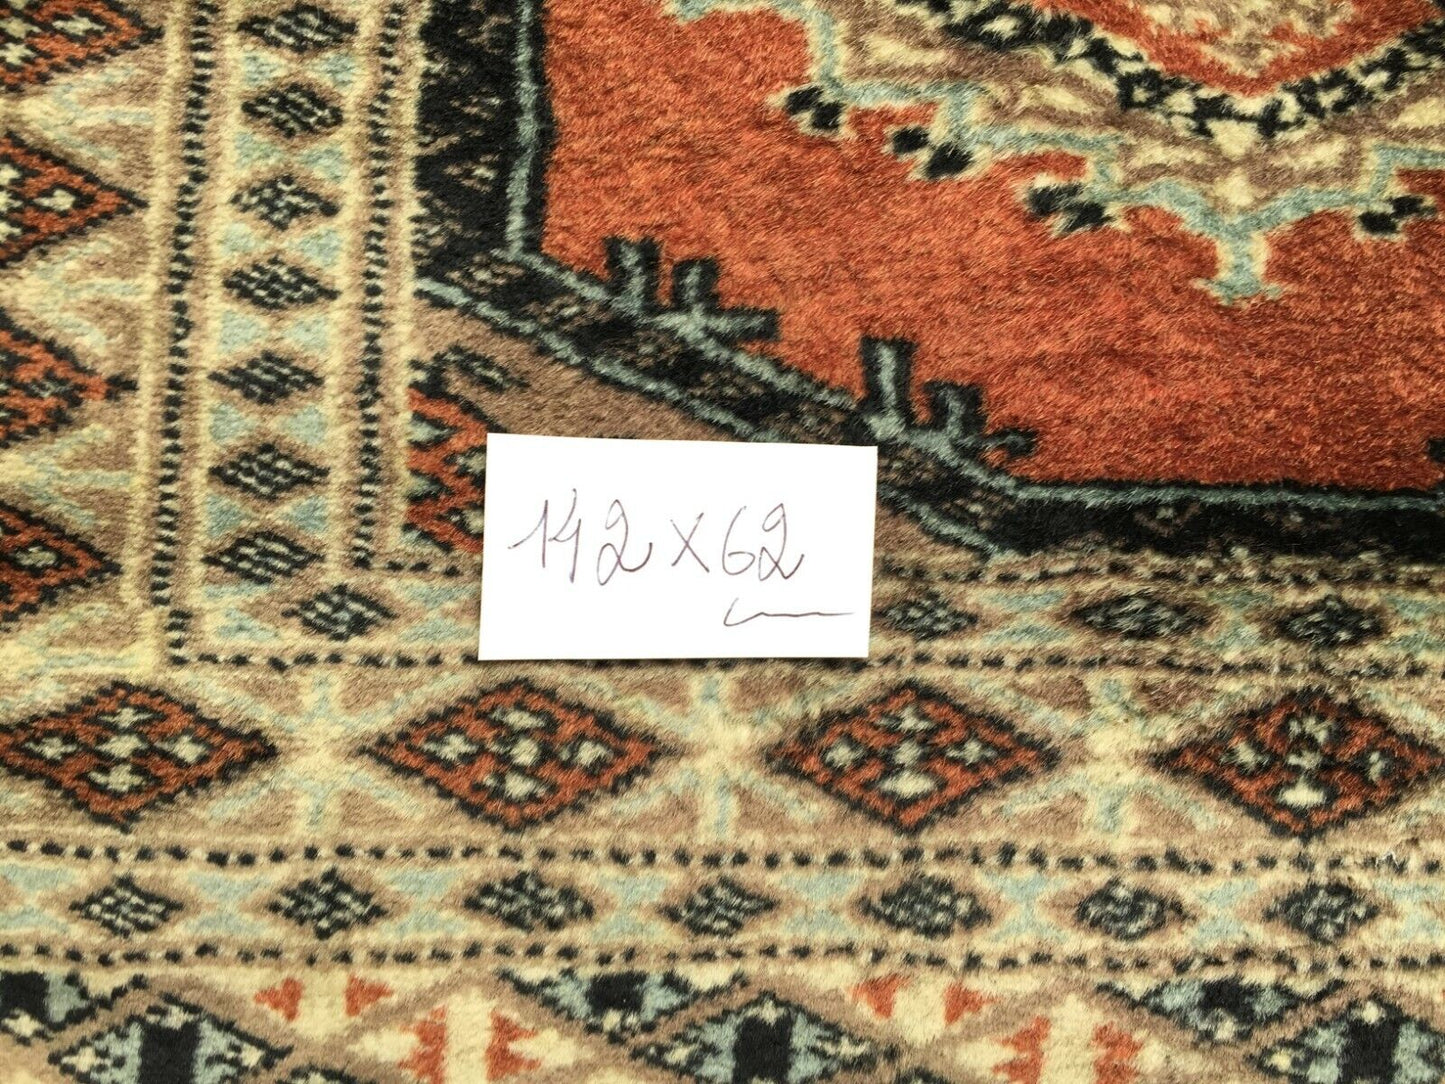 Good Condition Reflecting Quality and Care of Handmade Vintage Bukhara Rug - 1960s